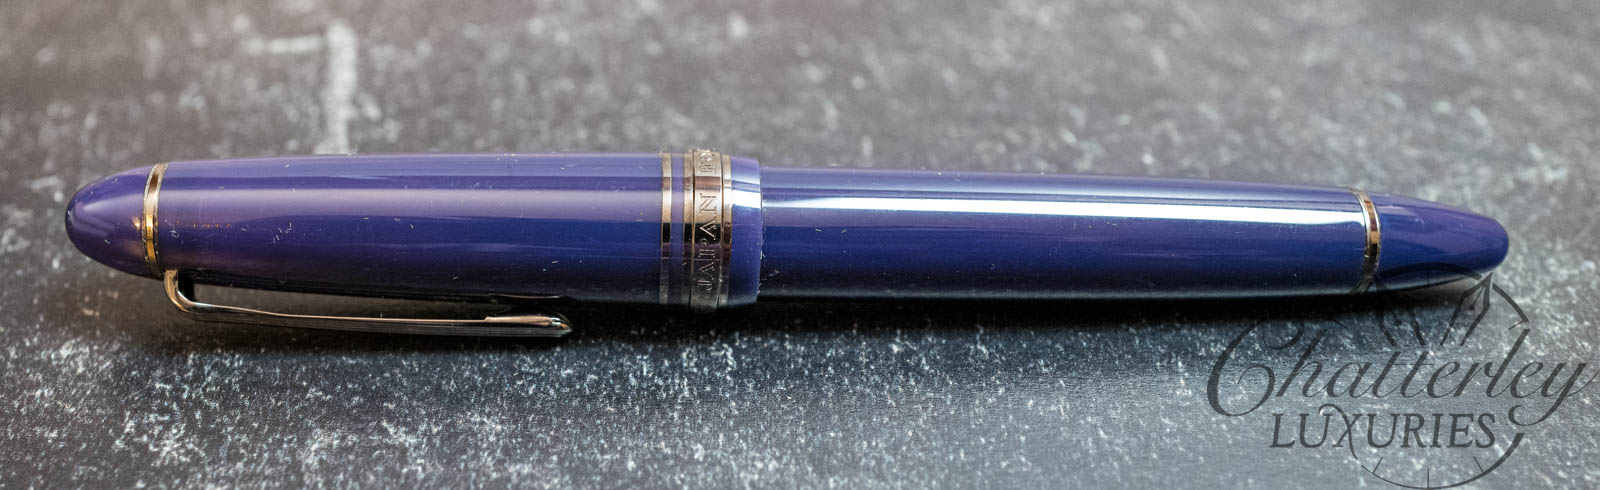 Sailor 1911 Large Fountain Pen - Wicked Witch of the West – Shigure Inks